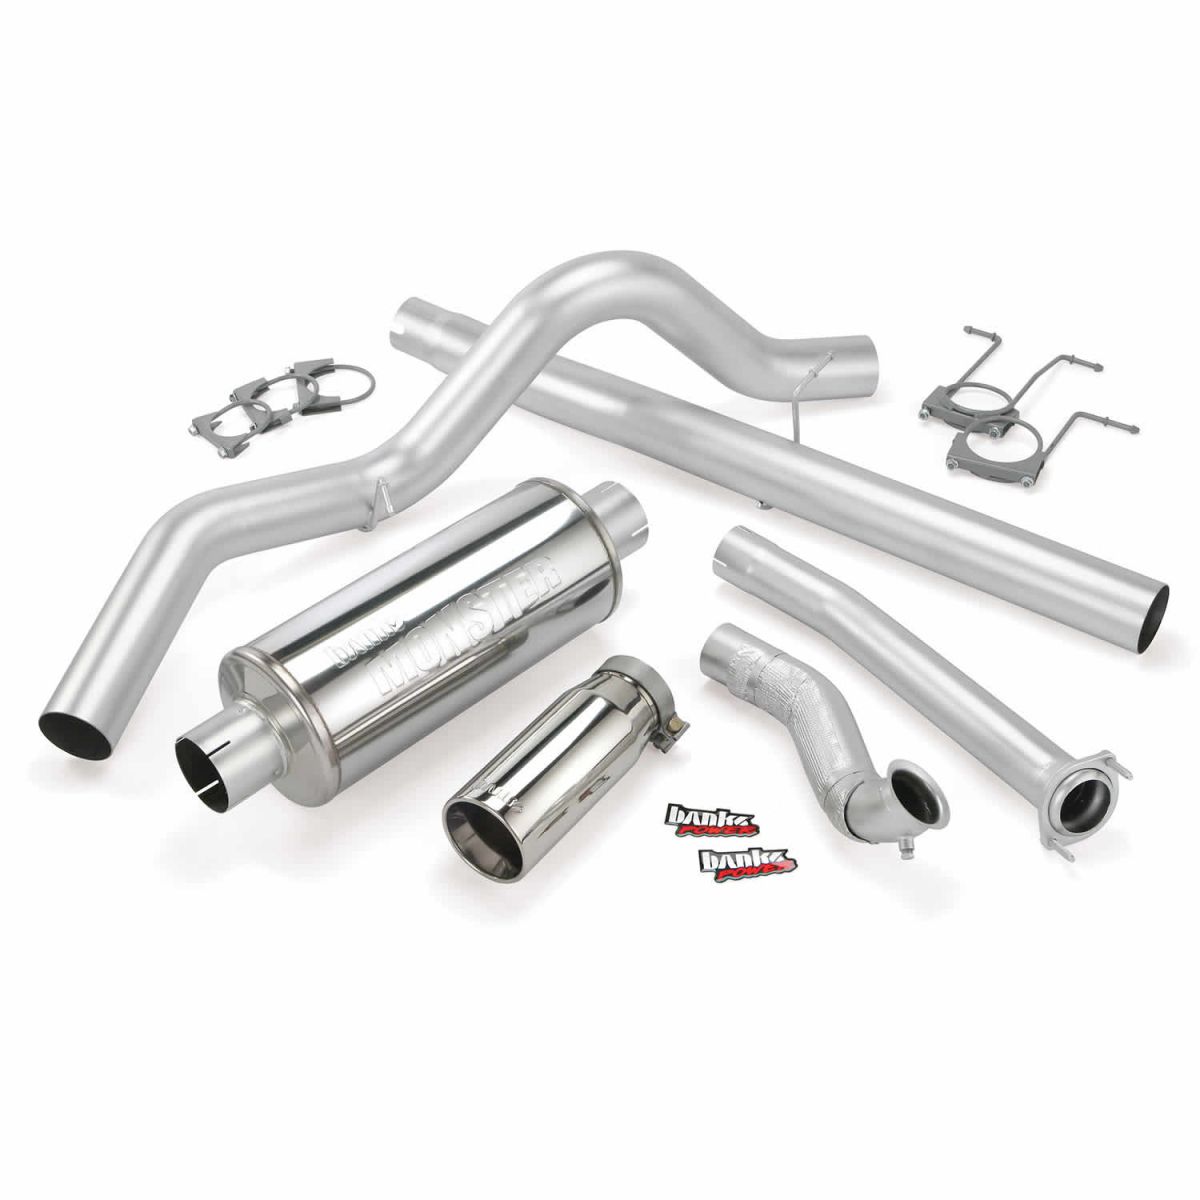 Banks Power - Banks Power Monster Exhaust System Single Exit With Chrome Tip For 94-97 7.3L Powerstroke CCLB